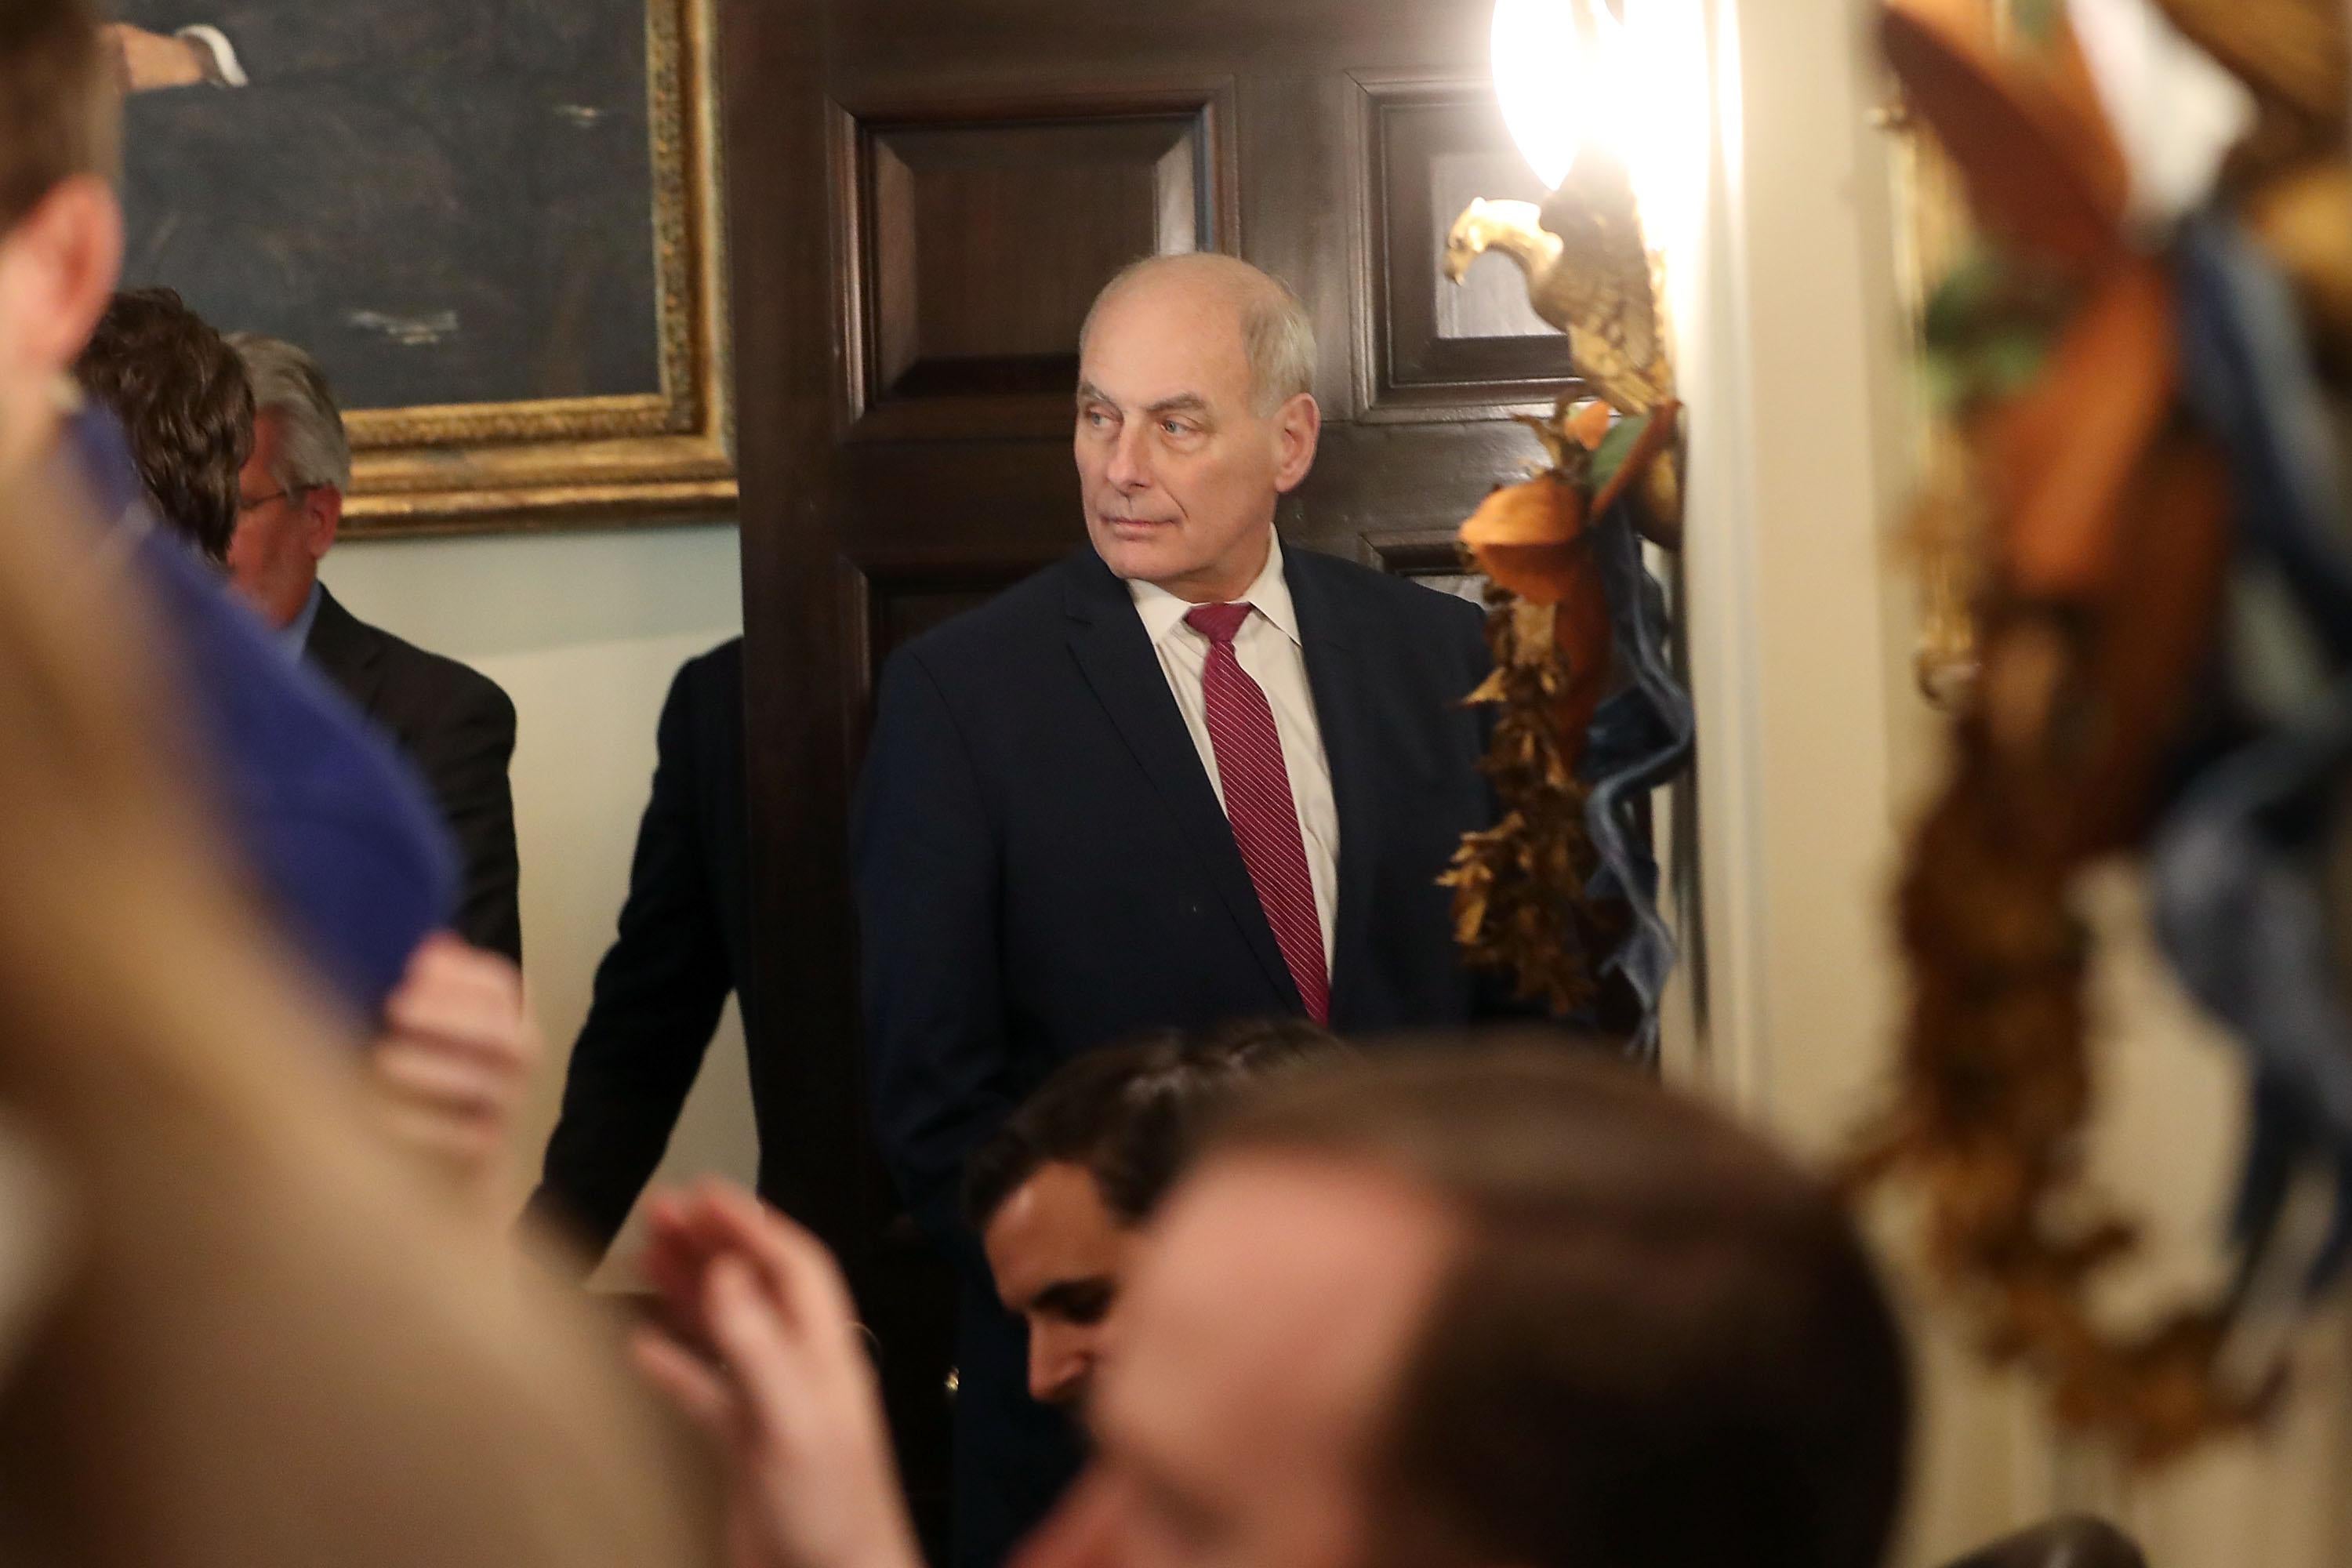 John Kelly looks to the side in a crowded room in the White House.